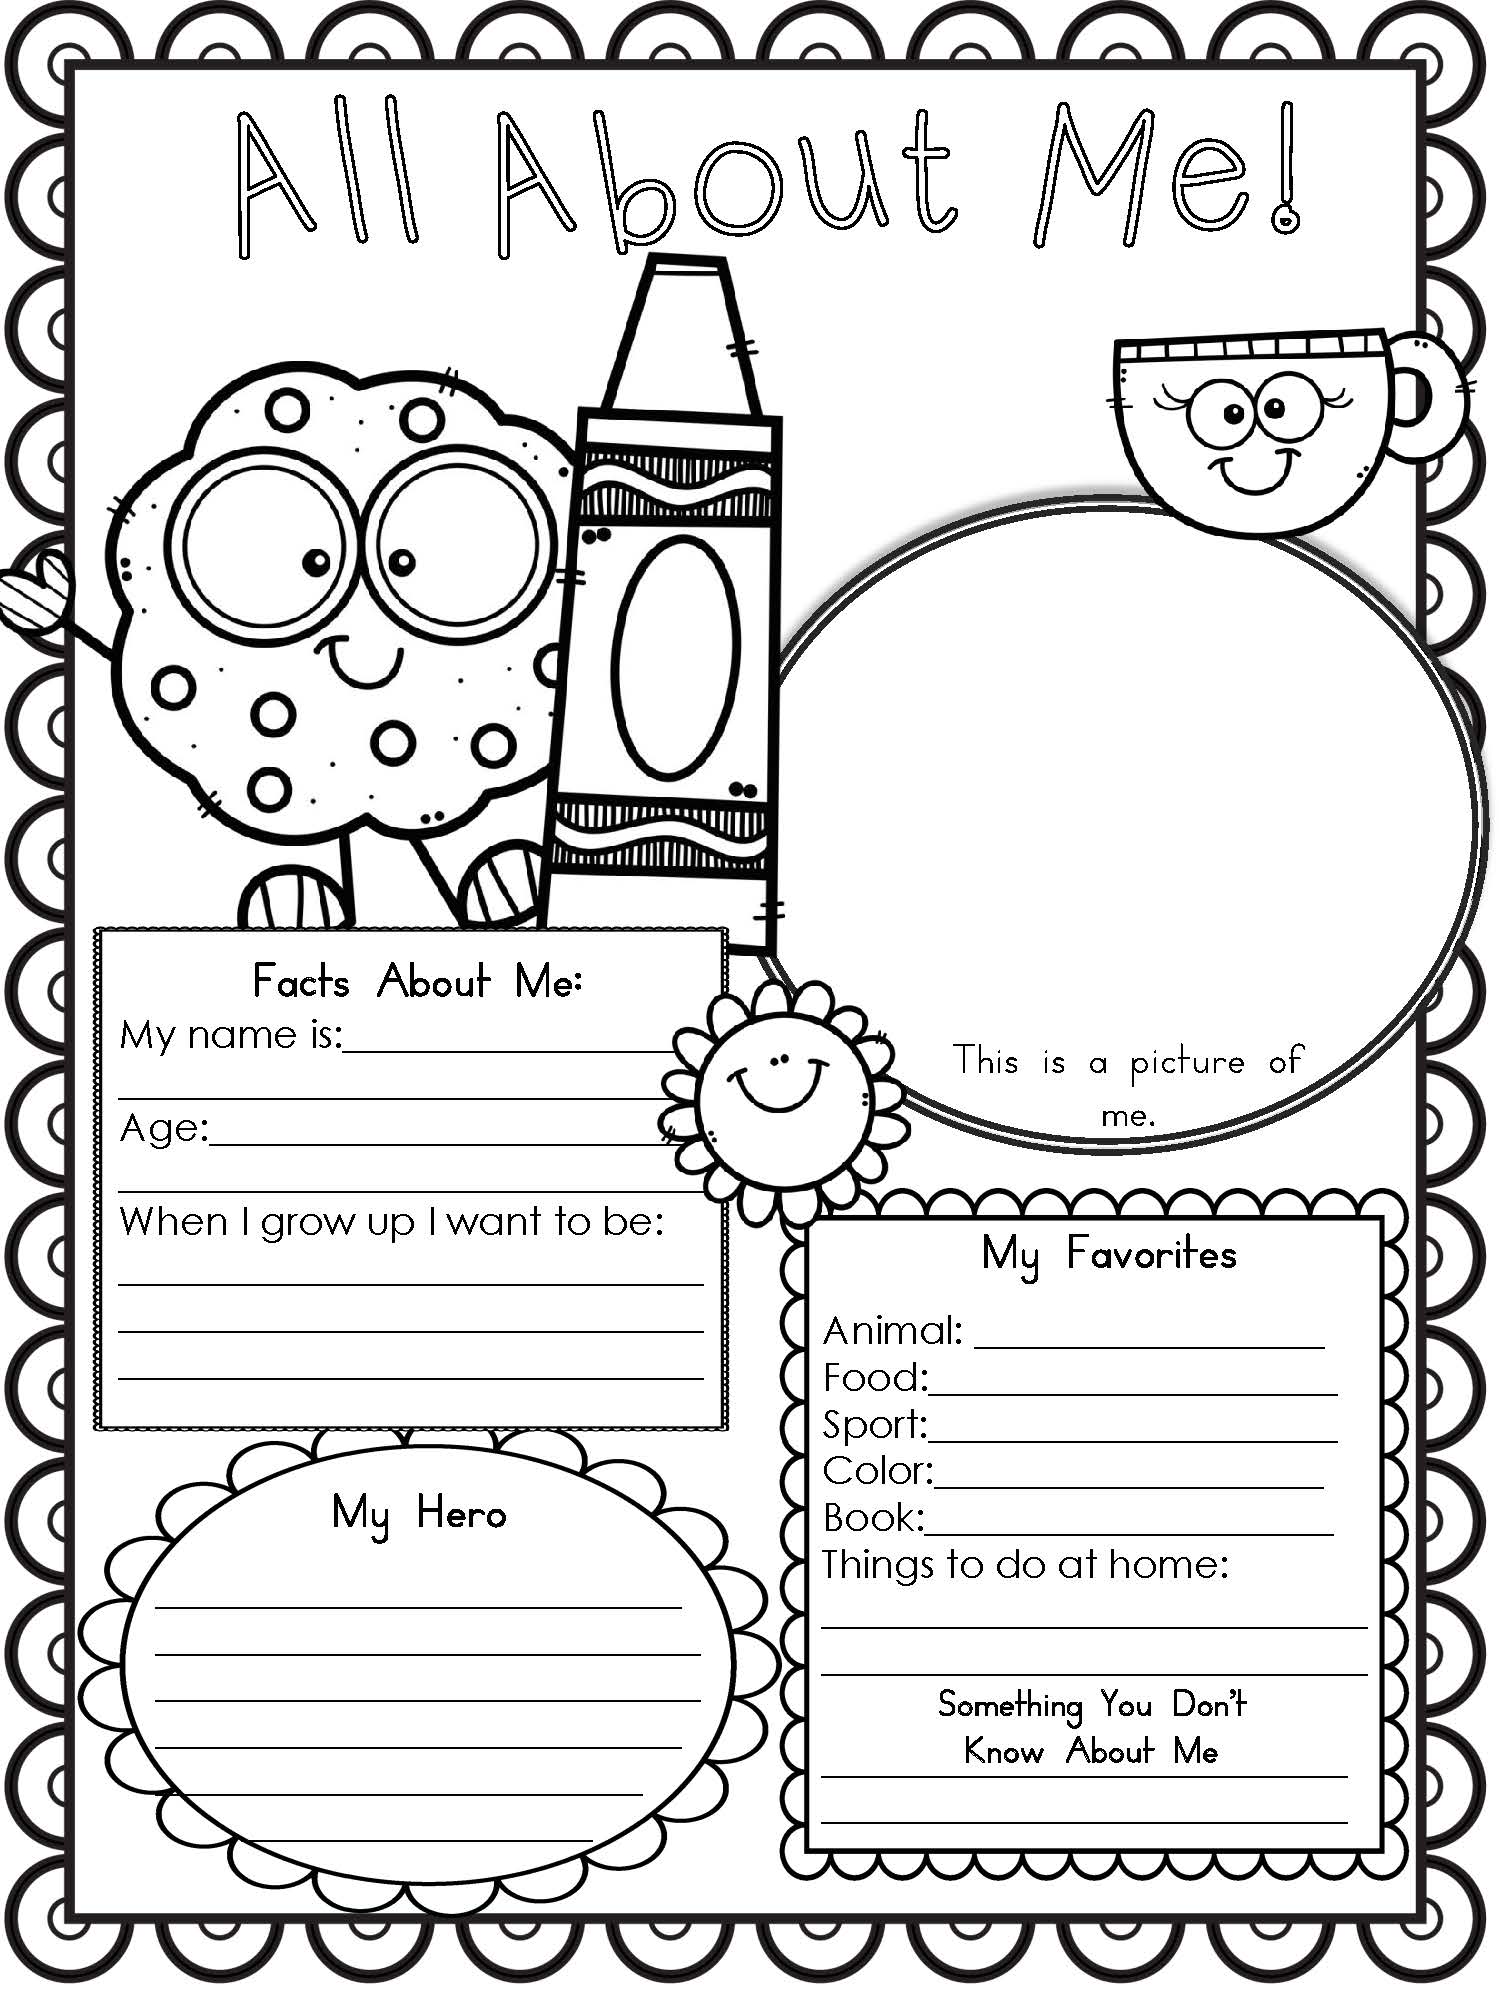 Free Printable All About Me Worksheet - Modern Homeschool Family Pertaining To All About Me Worksheet Preschool